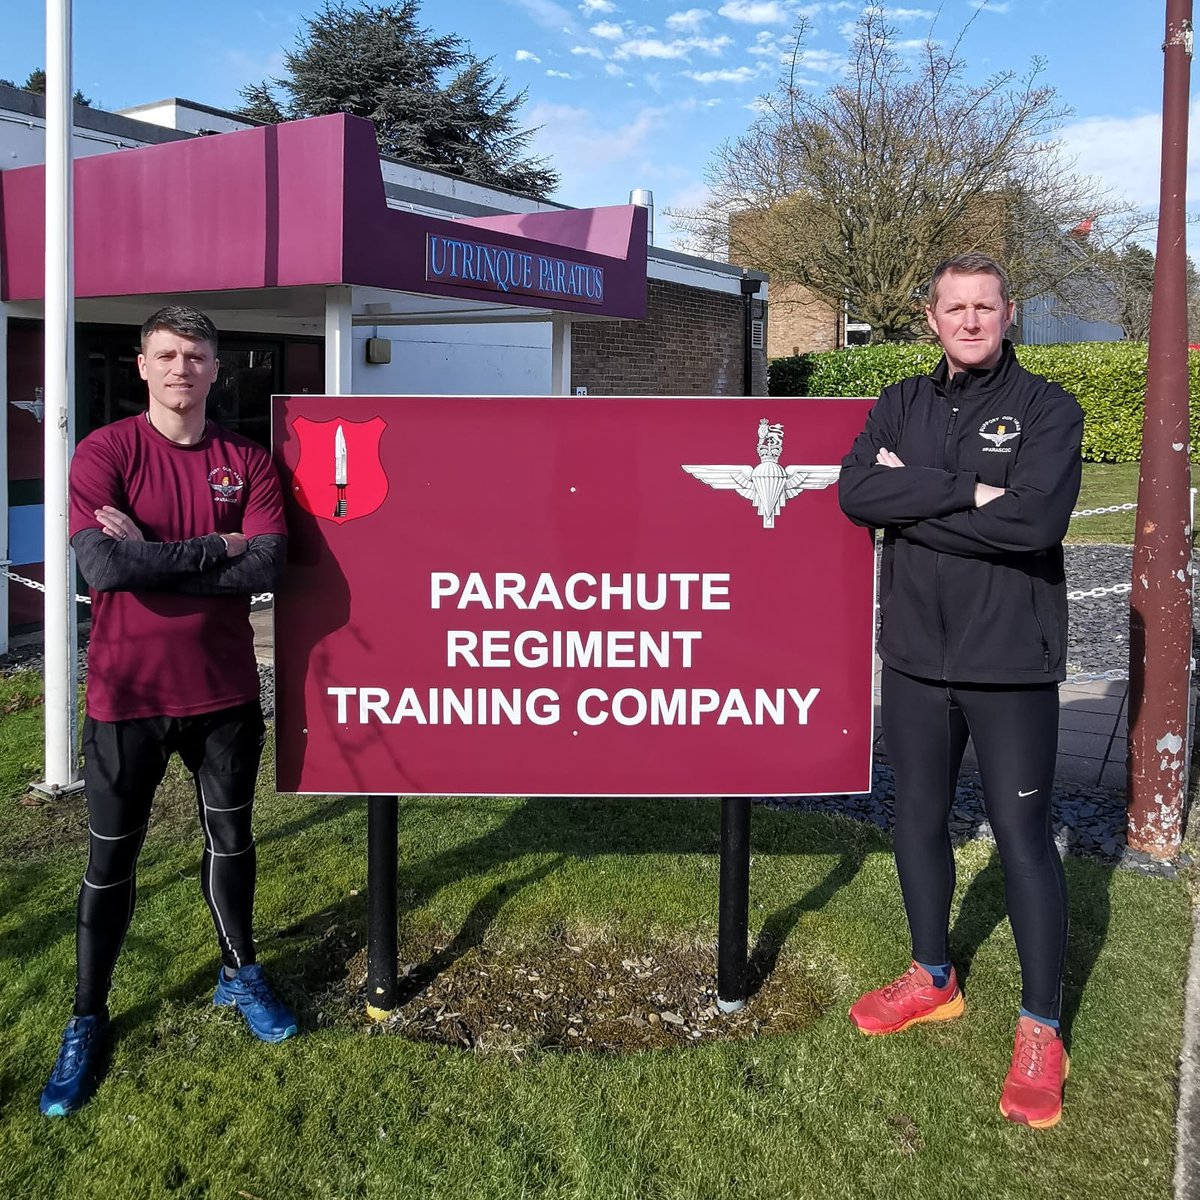 'Our own doing it for our own'. Capt Jamieson and WO2 Willis are well under way with their training for the 'Northern Traverse' 190mile ultra marathon. They are aiming to raise £5000 for Support Our Paras. Please follow/support and donate. @ParasC2C justgiving.com/fundraising/pa…